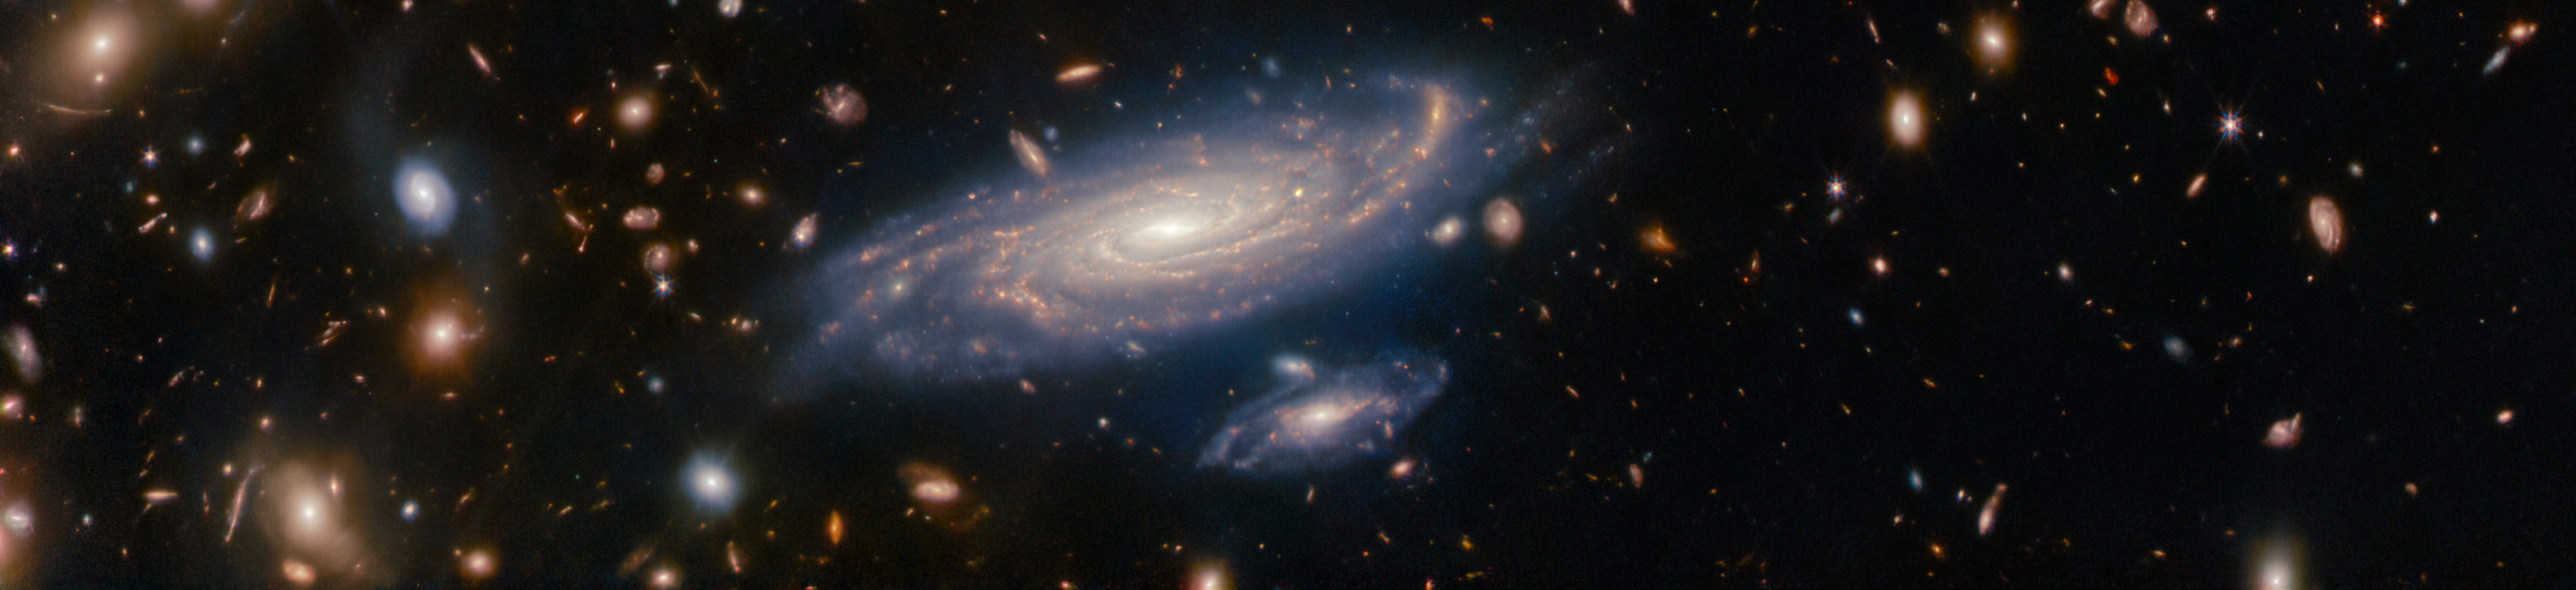 A crowded field of galaxies is interspersed with bright 8-pointed stars on a dark background. The galaxies and stars come in a variety of sizes and colors, ranging from bluish white to orange. Some galaxies are large enough to make out spiral arms, while others look like faint smudges or pinpricks. The most prominent feature is a large, detailed spiral galaxy called LEDA 2046648, seen at an oblique angle towards the bottom of the frame. A smaller spiral galaxy is just below it. About one-quarter the size of its larger companion, this small galaxy looks like a miniature version of LEDA 2046648. Both of these spiral galaxies have glowing cores and areas of star formation lighting up their pale pink arms.